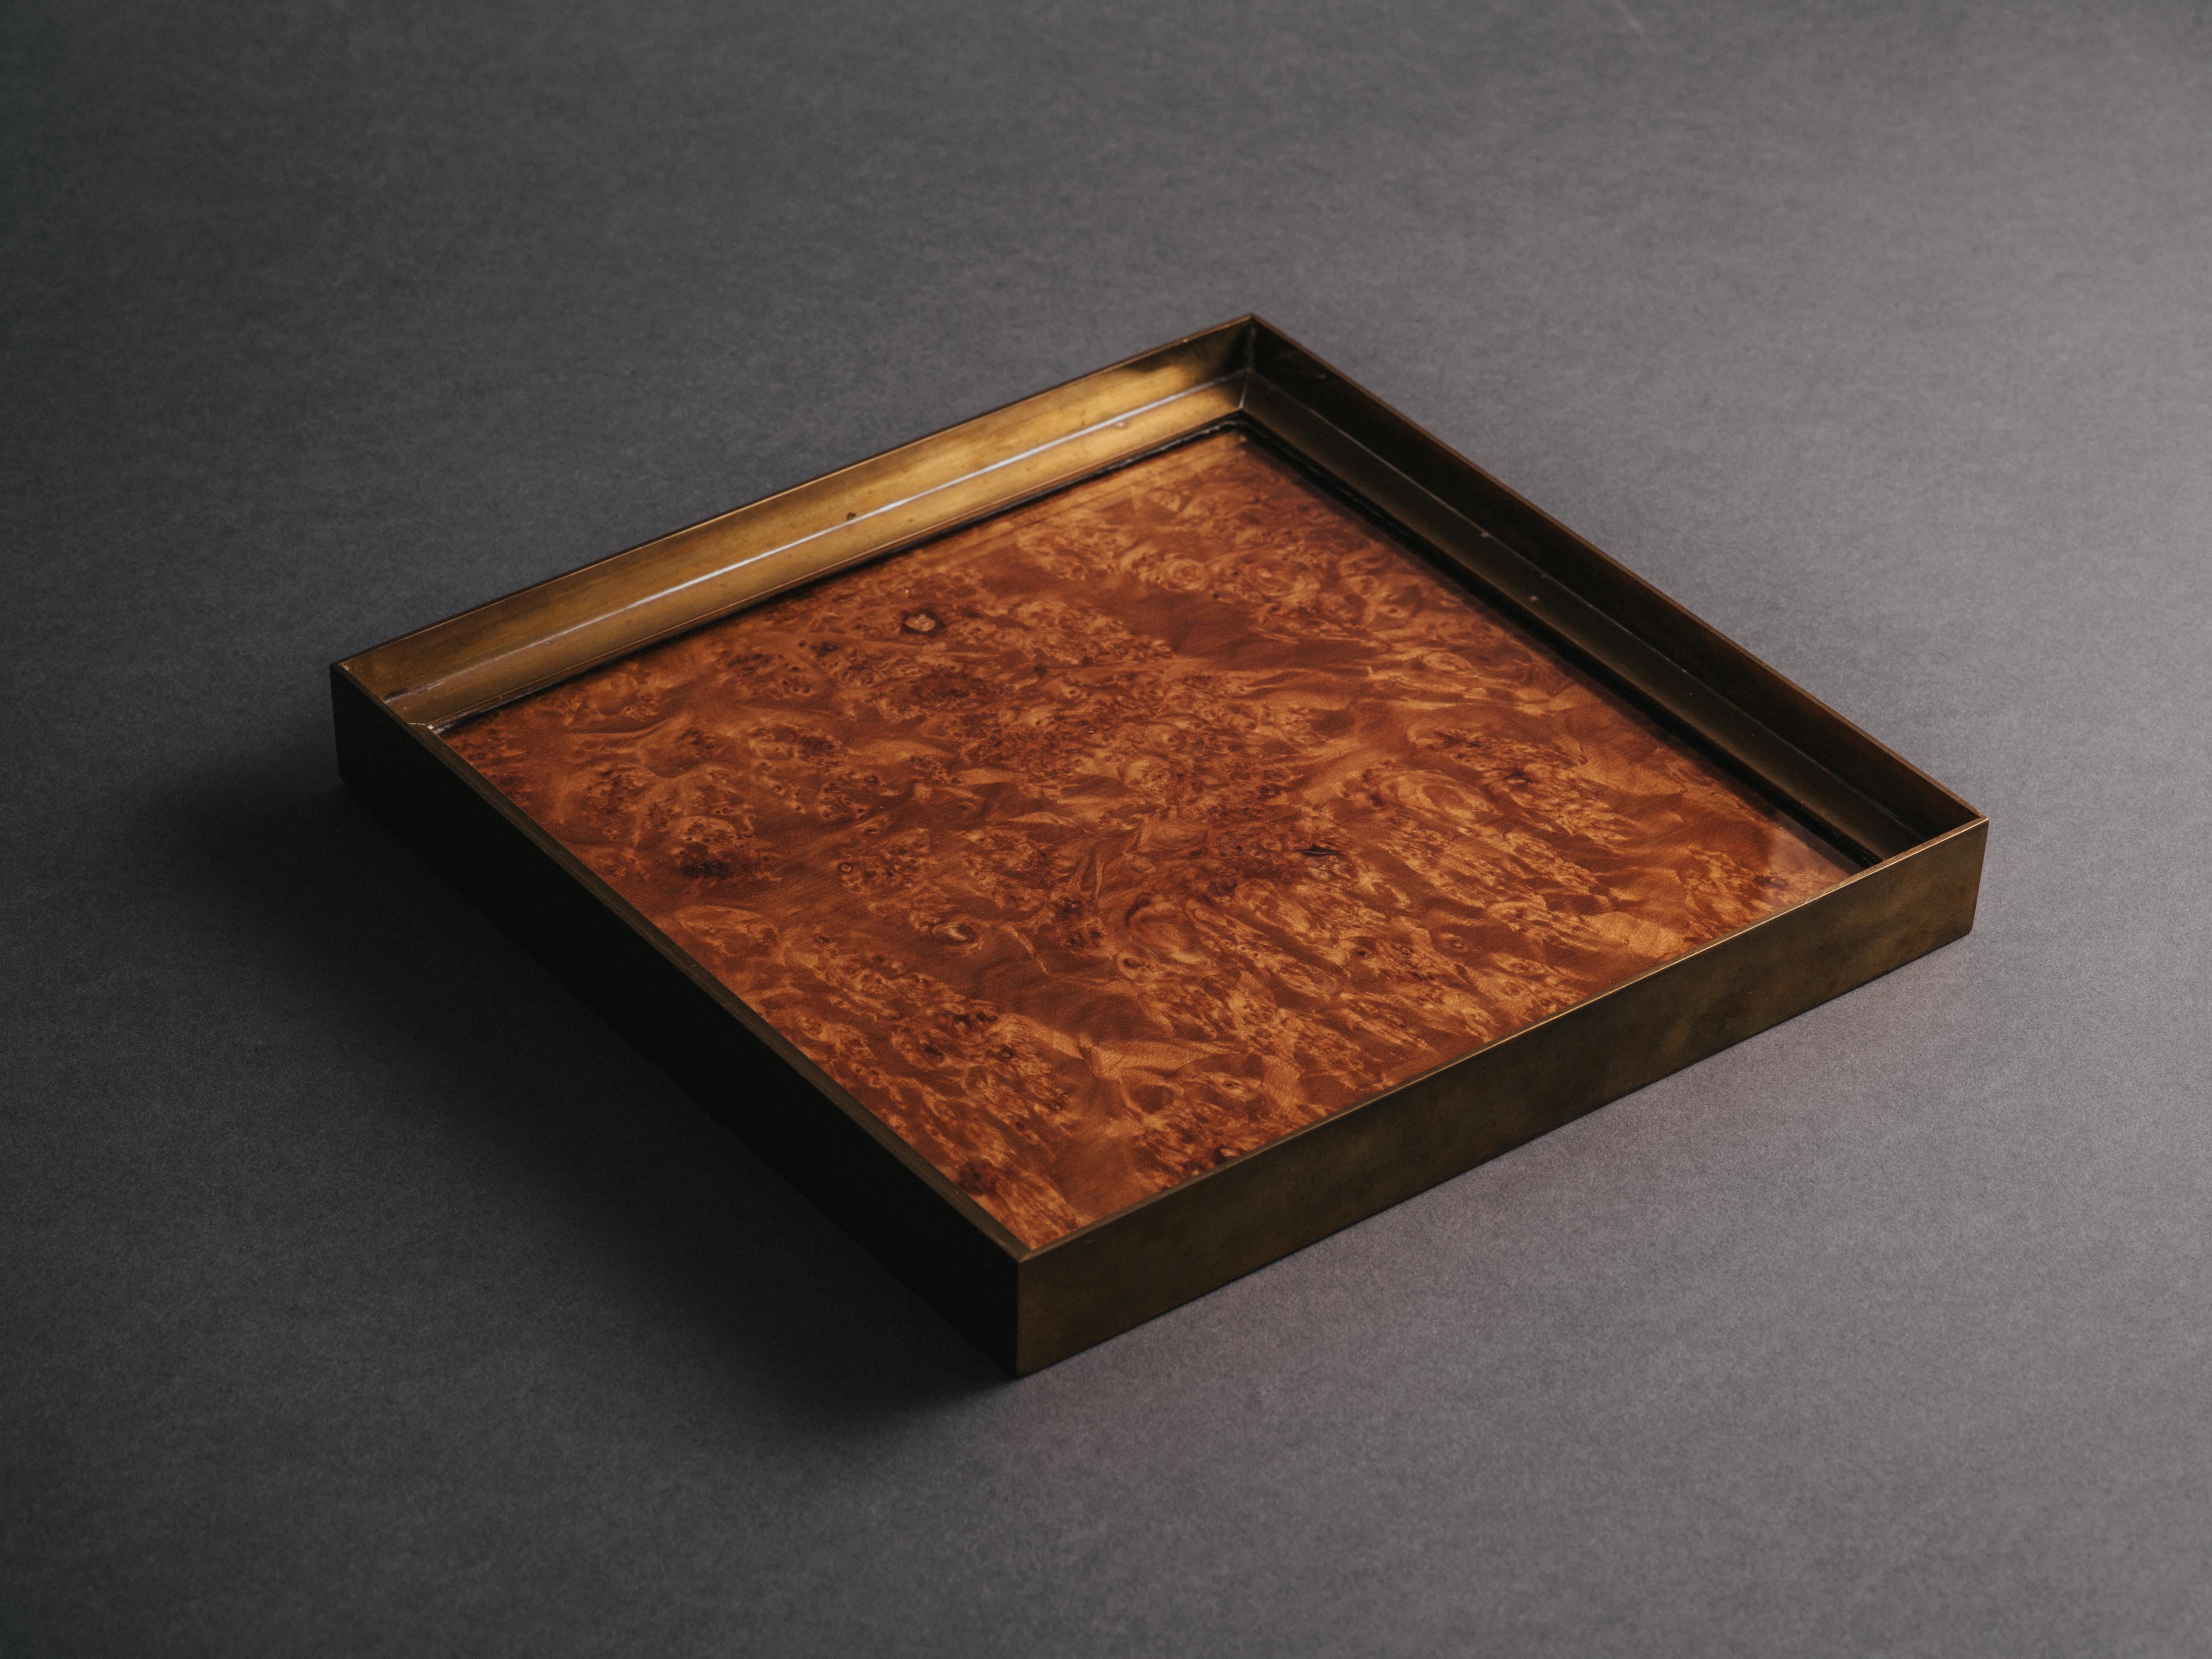 Square vide poche (Italian: svuotatasche) by Gabriella Crespi, comprising a glass-covered briar wood burl interior framed in lacquered, solid brass. Retains original felt and brass mounting corners to underside. Engraved signature to frame which